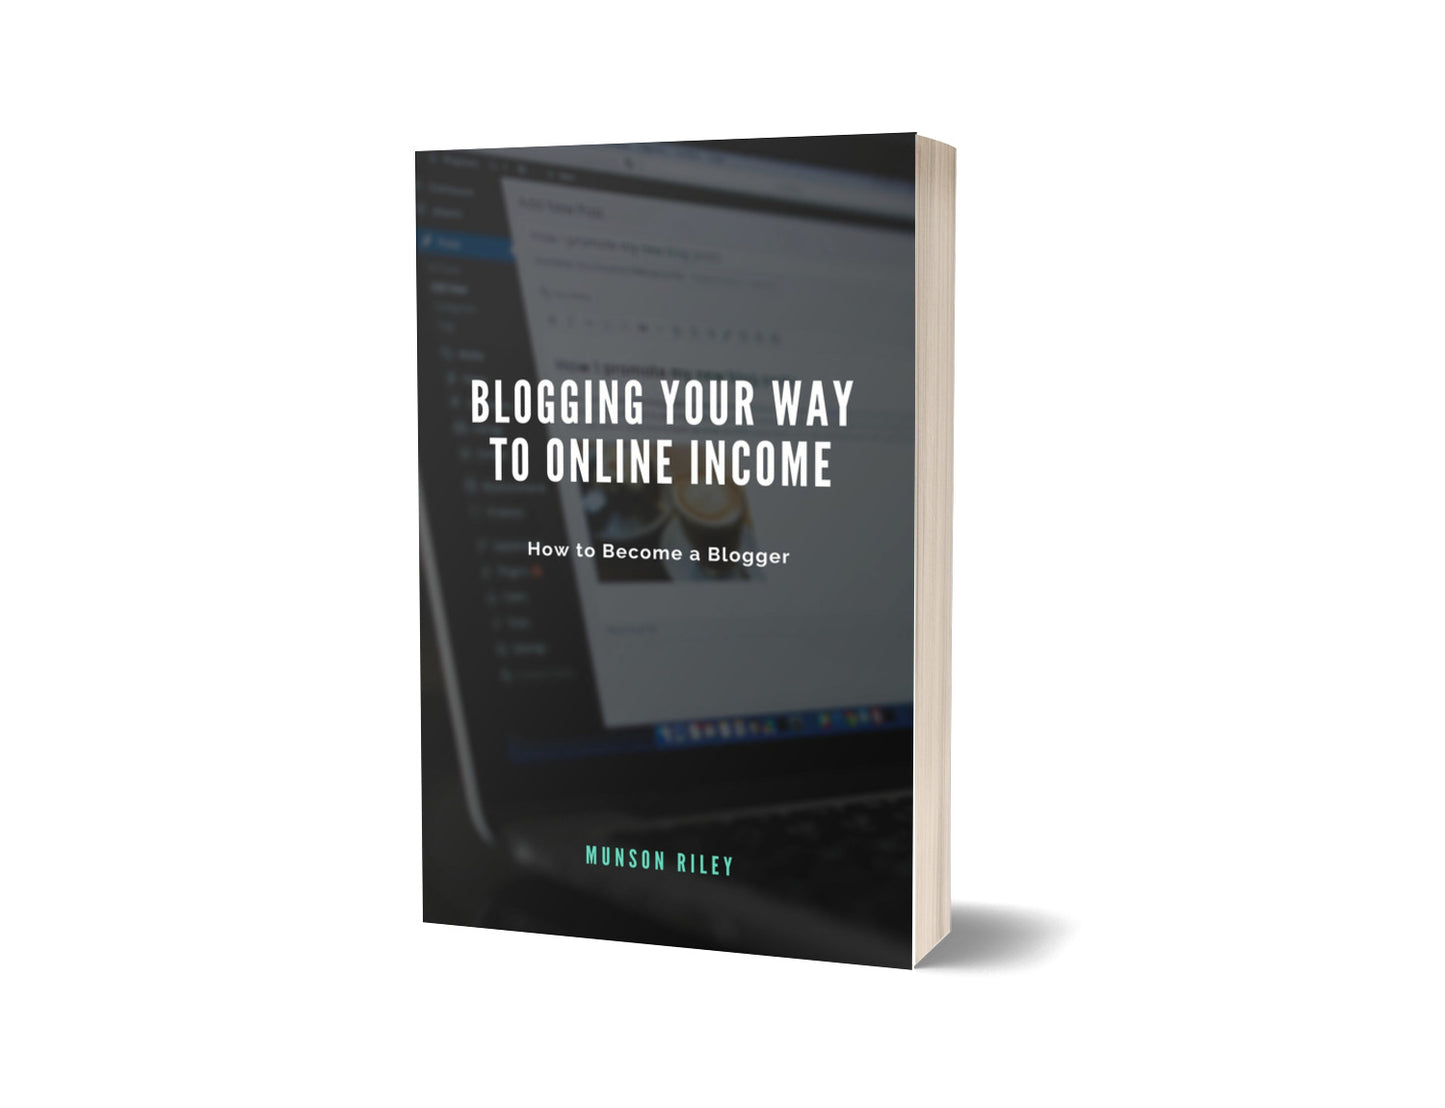 Blogging Your Way to Online Income: How to Become a Blogger by Munson Riley